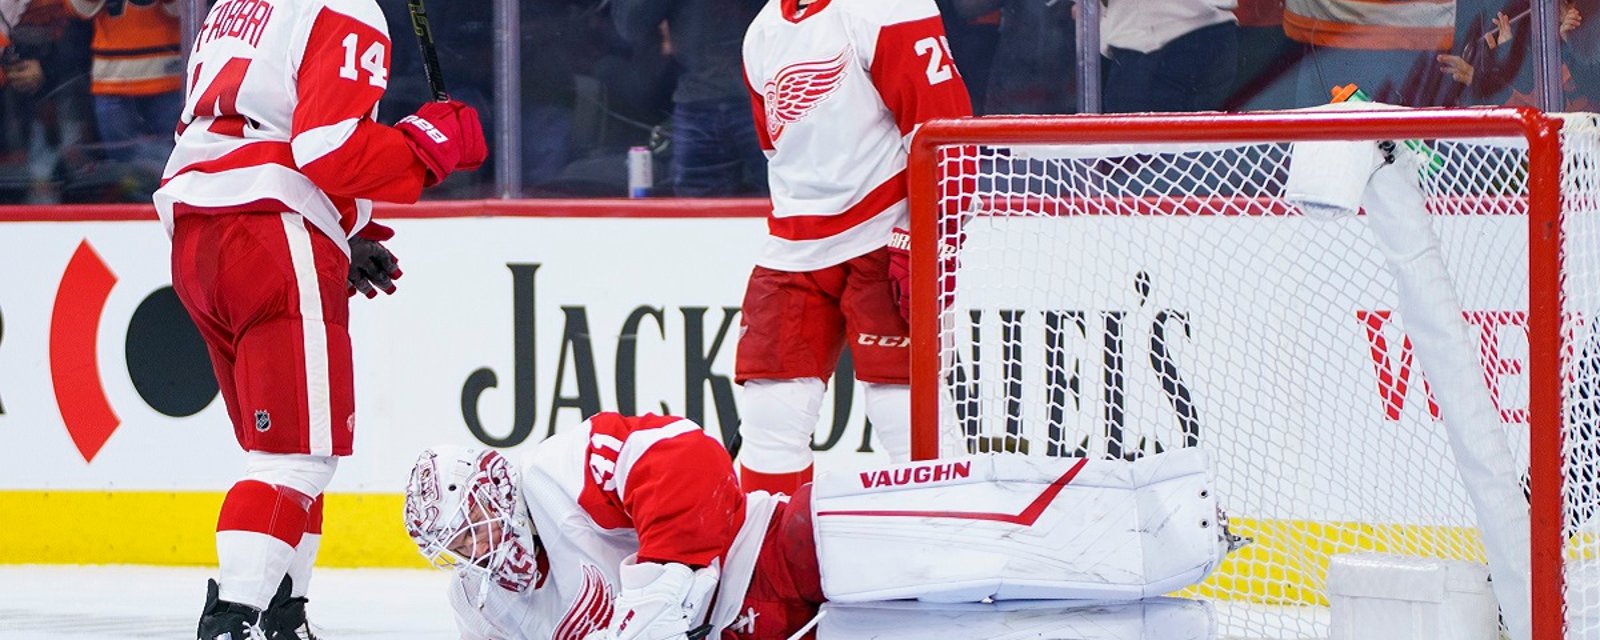 Red Wings make extremely unpopular call up on an emergency basis.